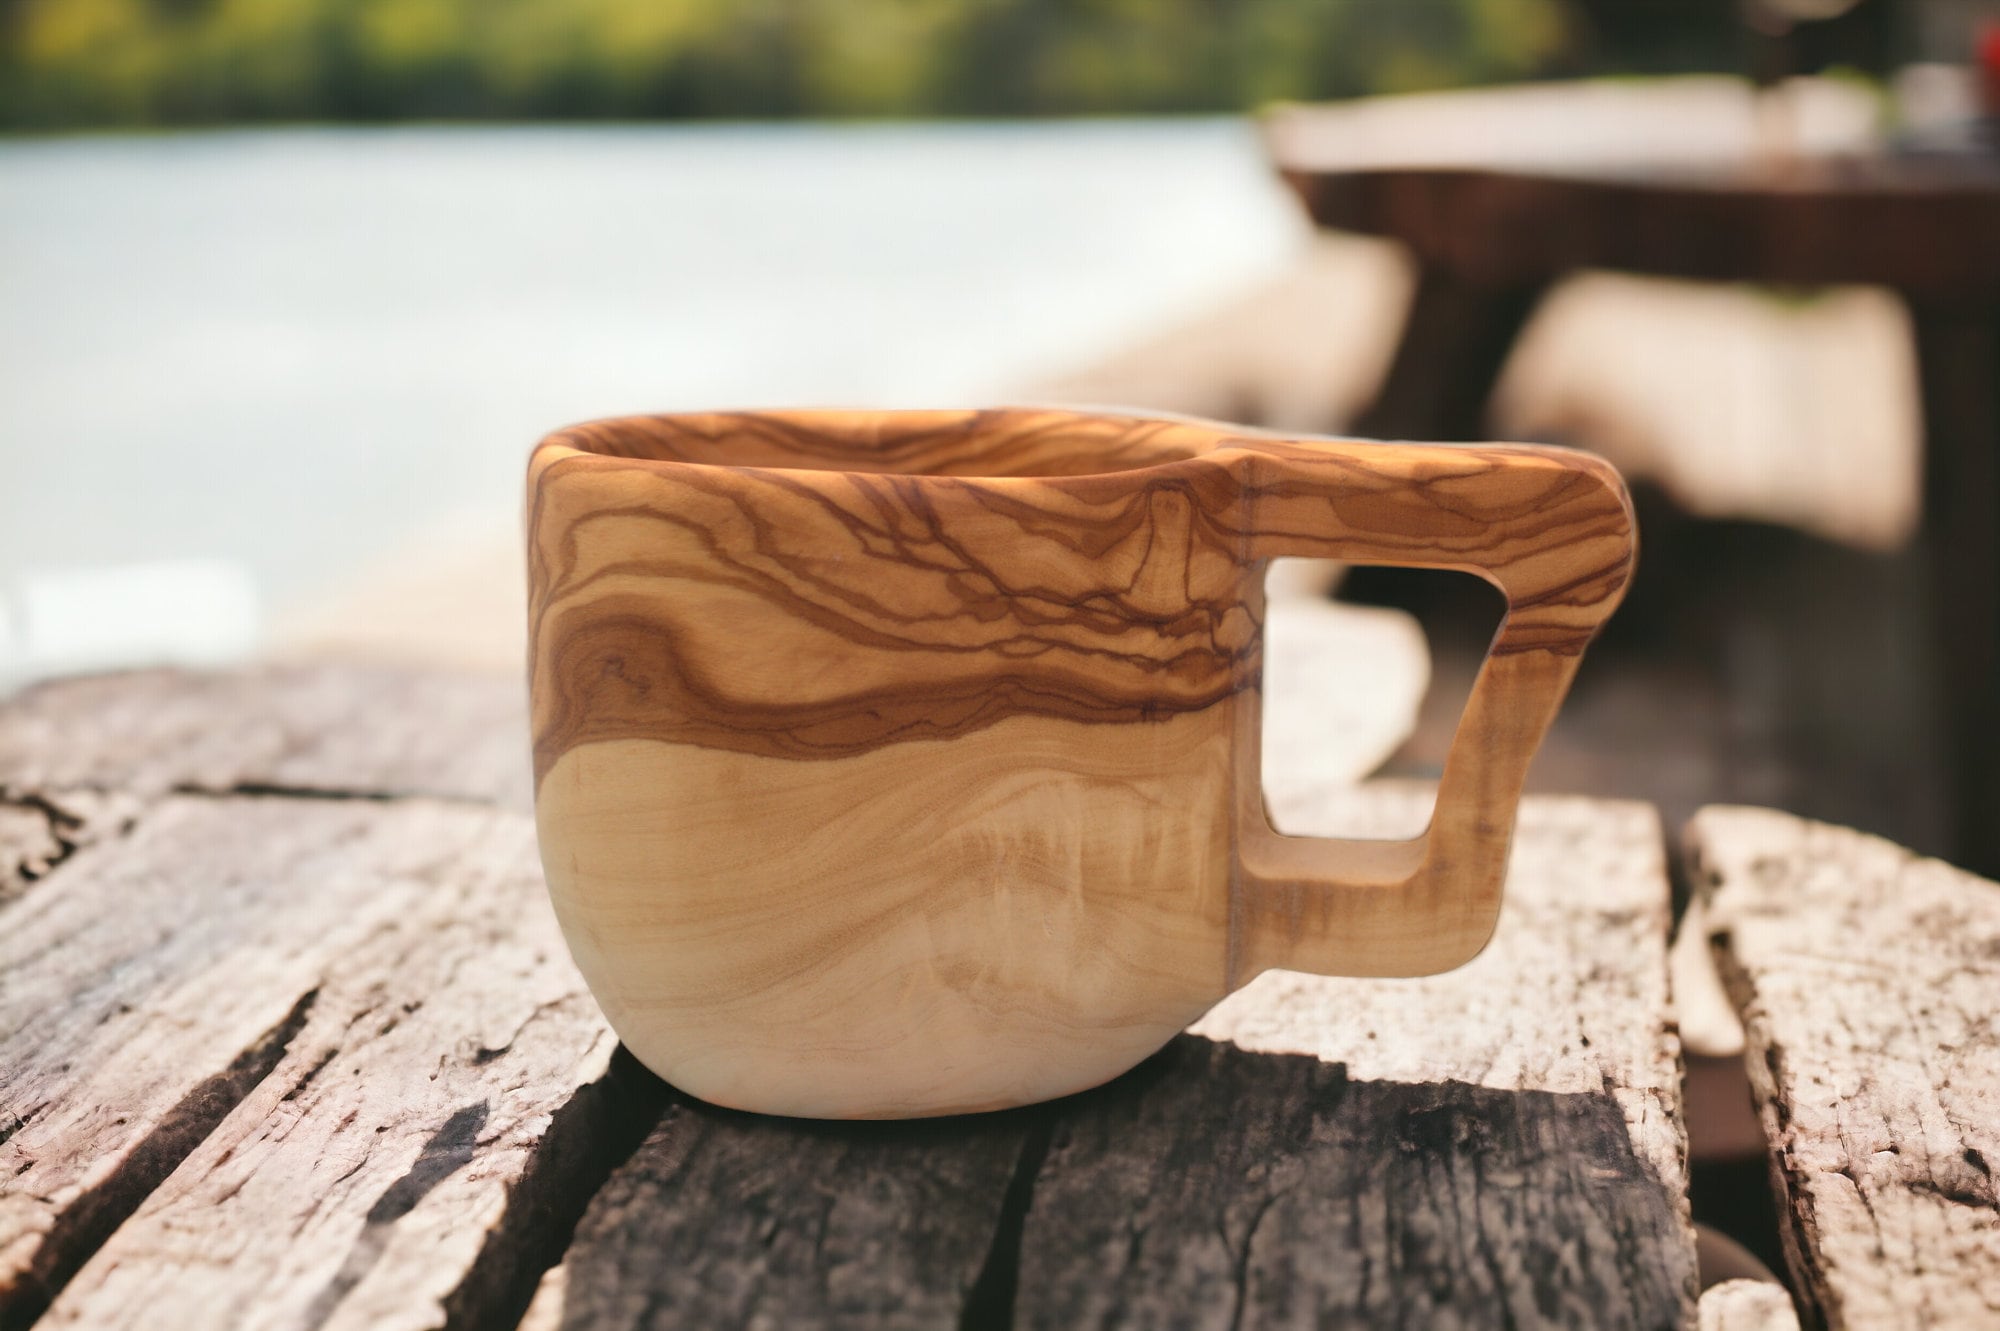  TY&WJ Handmade Kuksa Wooden Mug,Animals Head Image Wooden  Cup,Portable Camping Drinking Cup,Traditional Wooden Cup with  Carabiner,Outdoor Cup for Coffee Tea Milk-Fox A : Home & Kitchen